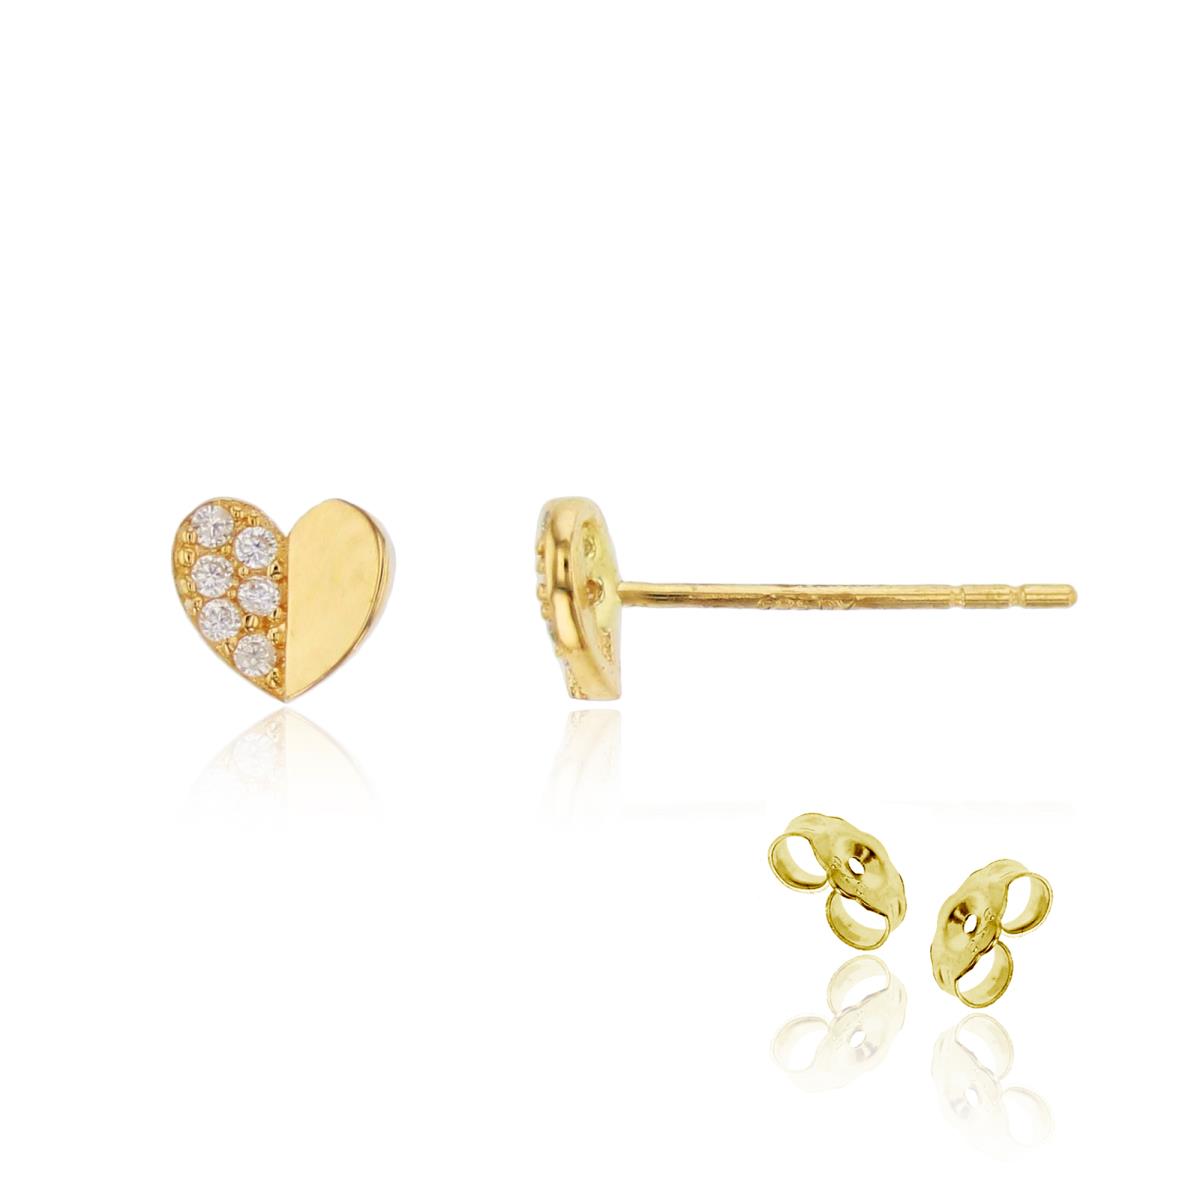 10K Yellow Gold Half Polished Half Paved Heart Stud Earring with 4.5mm Clutch